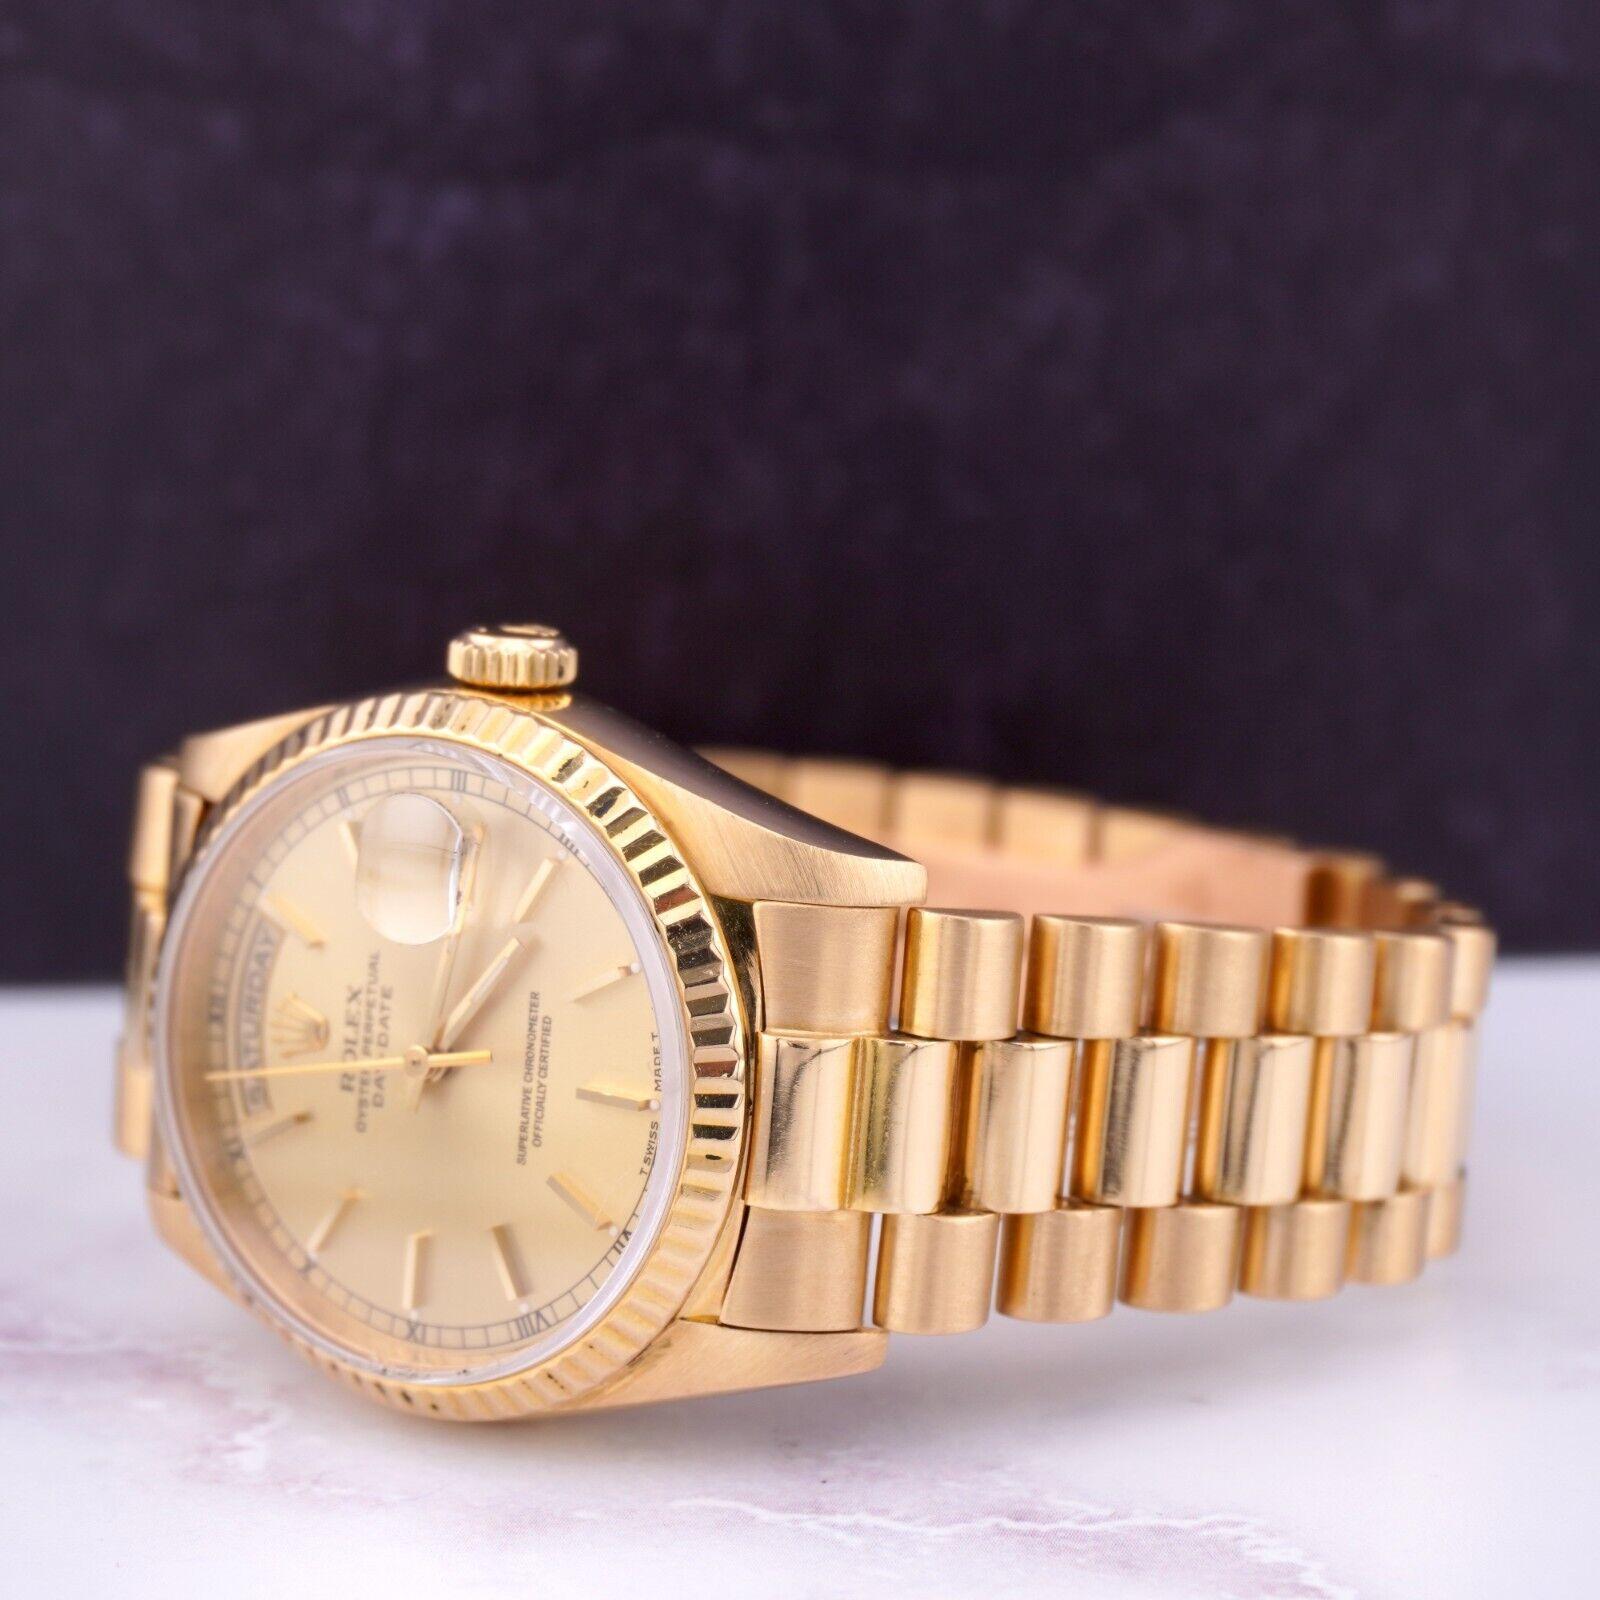 Modern Rolex DAY-DATE 36mm 18K Yellow Gold President Men's Gold Dial Watch Ref: 18238 For Sale